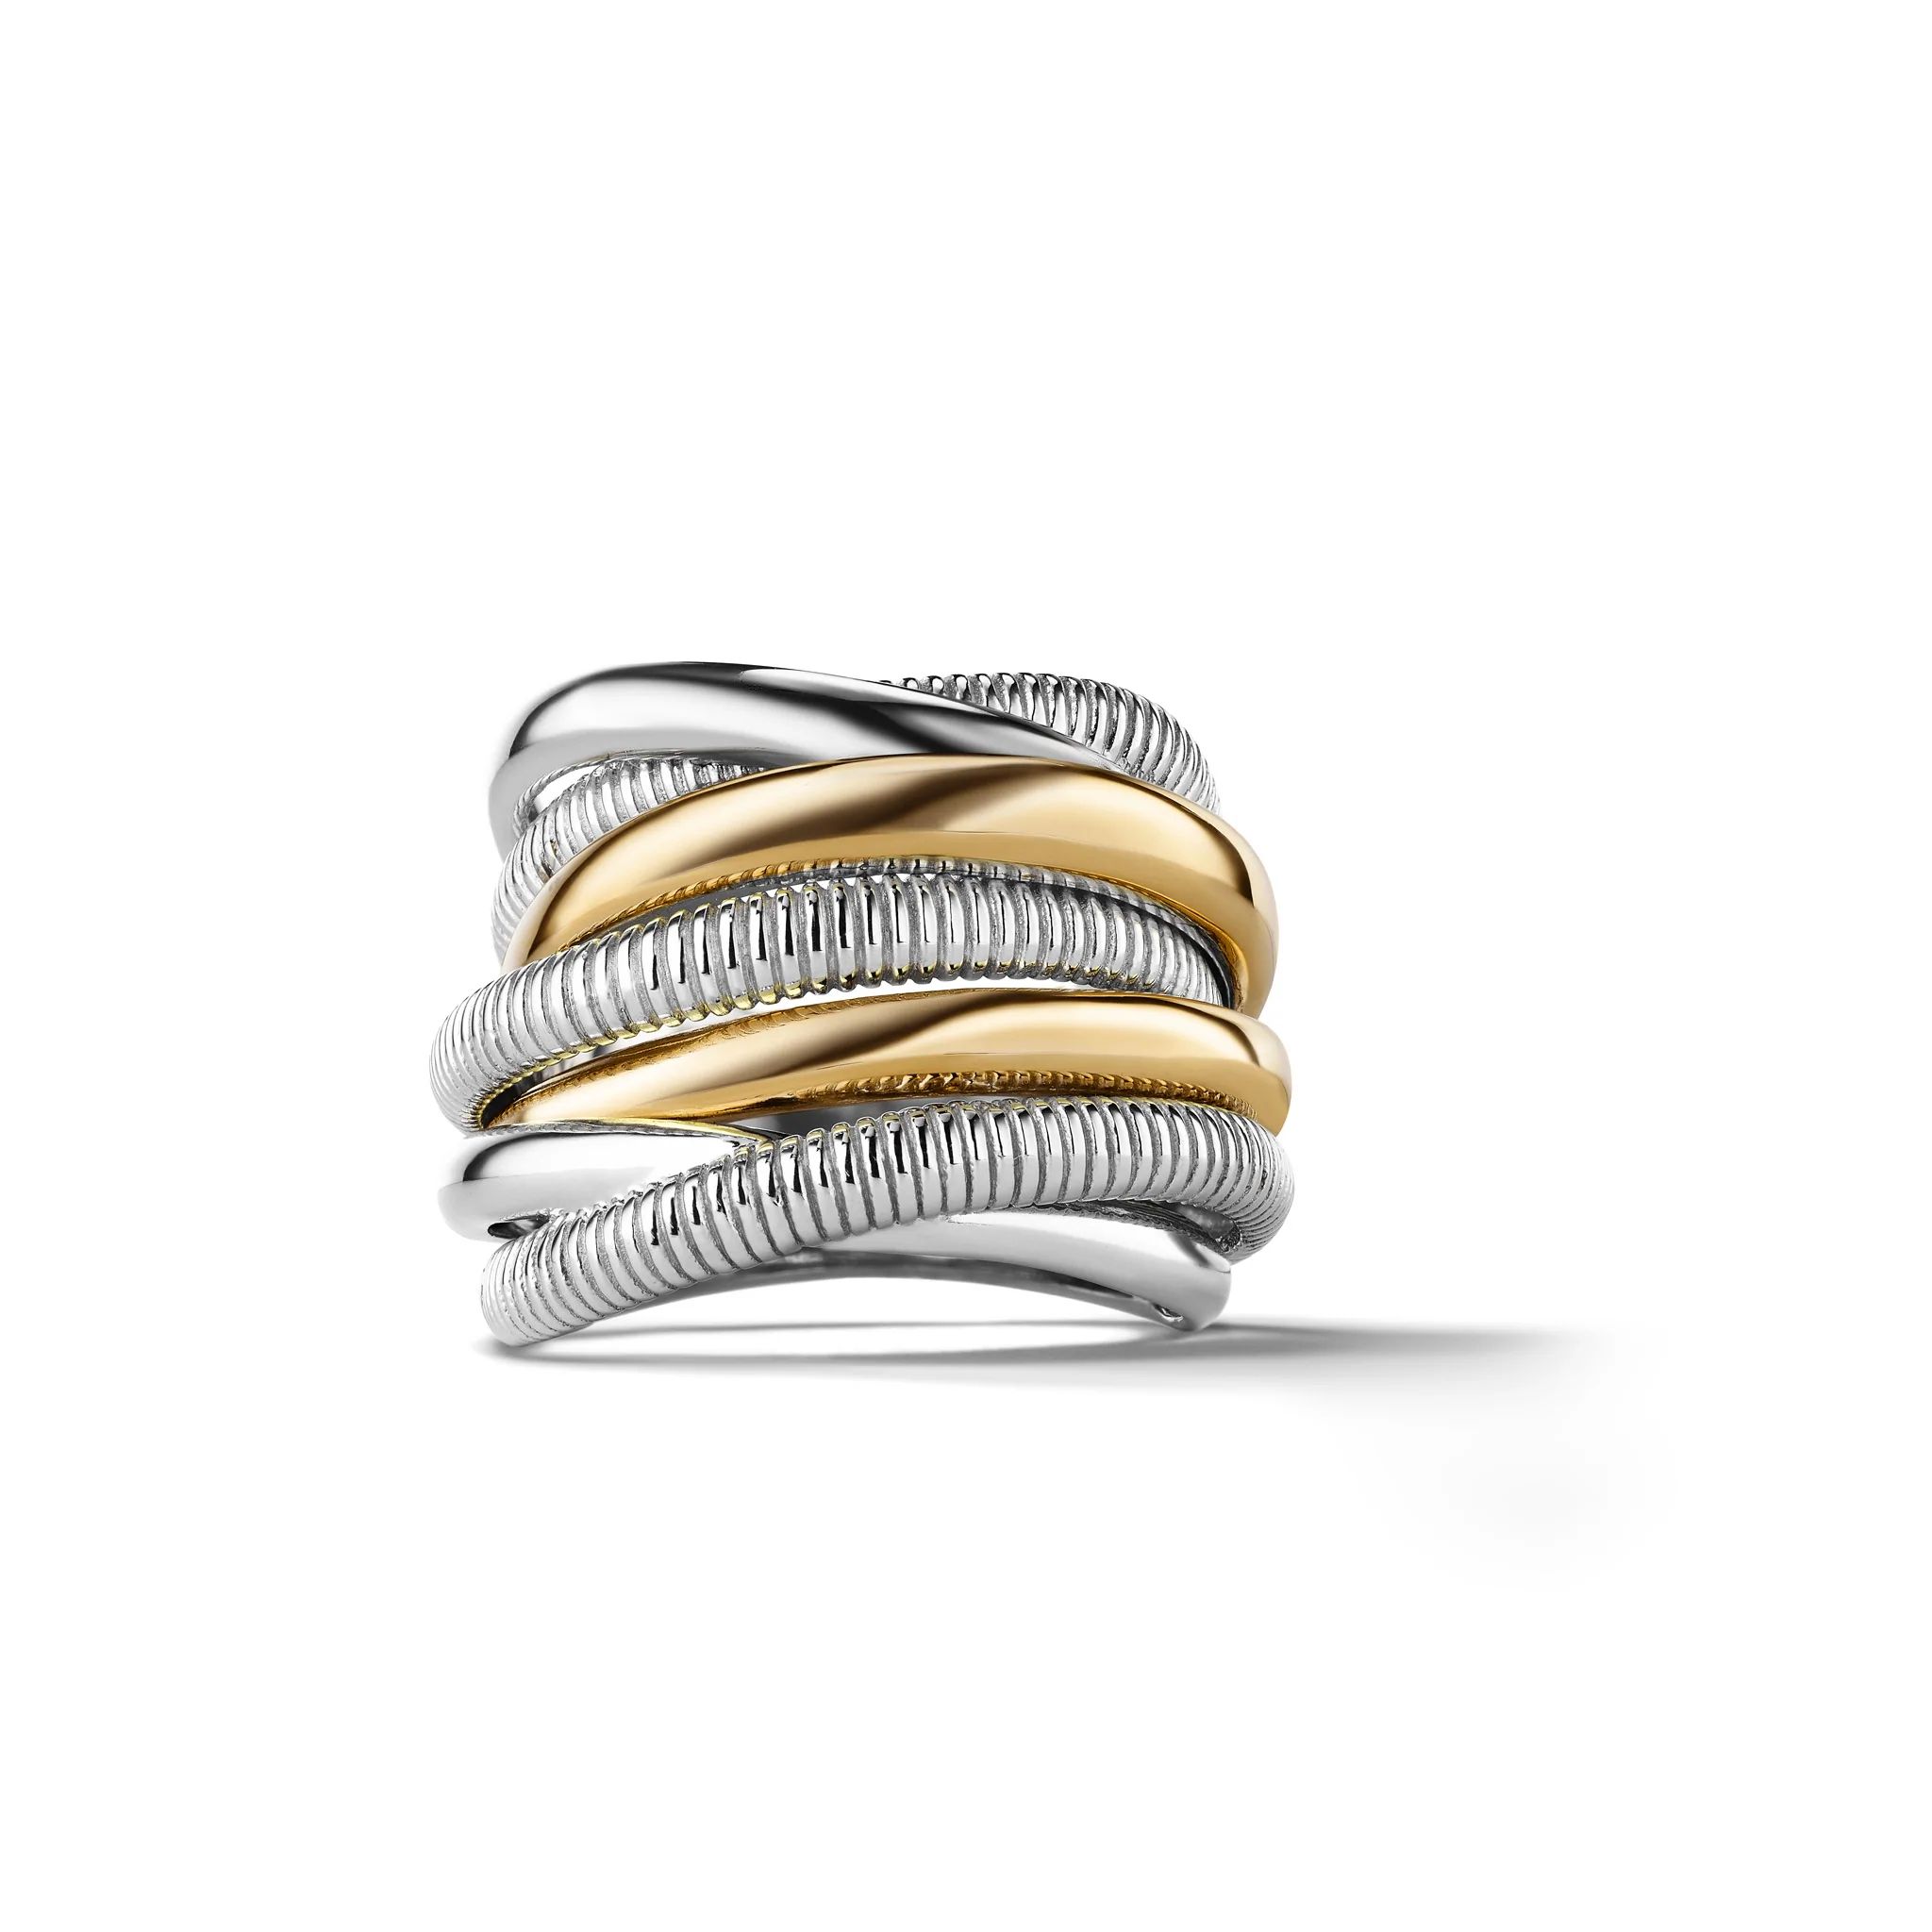 Eternity Seven Band Highway Ring with 18K Gold | Judith Ripka 